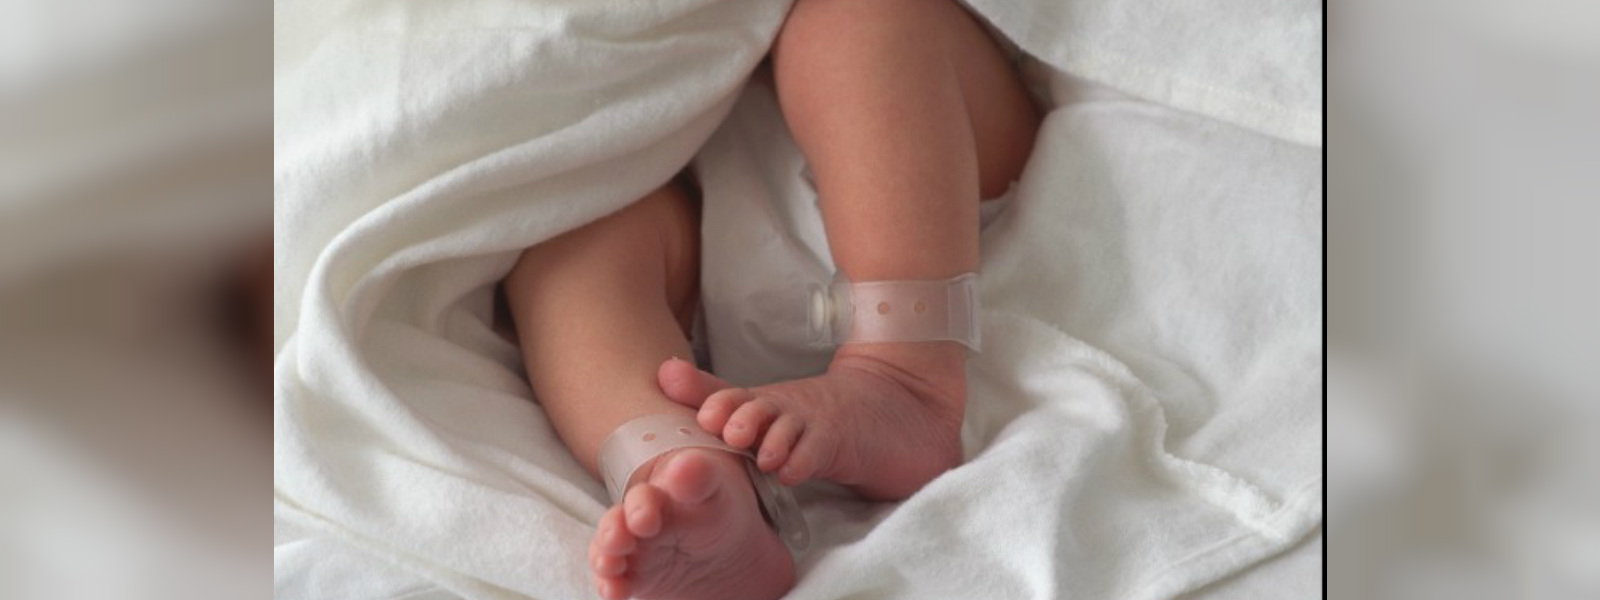 6-day old infant falls victim to COVID-19